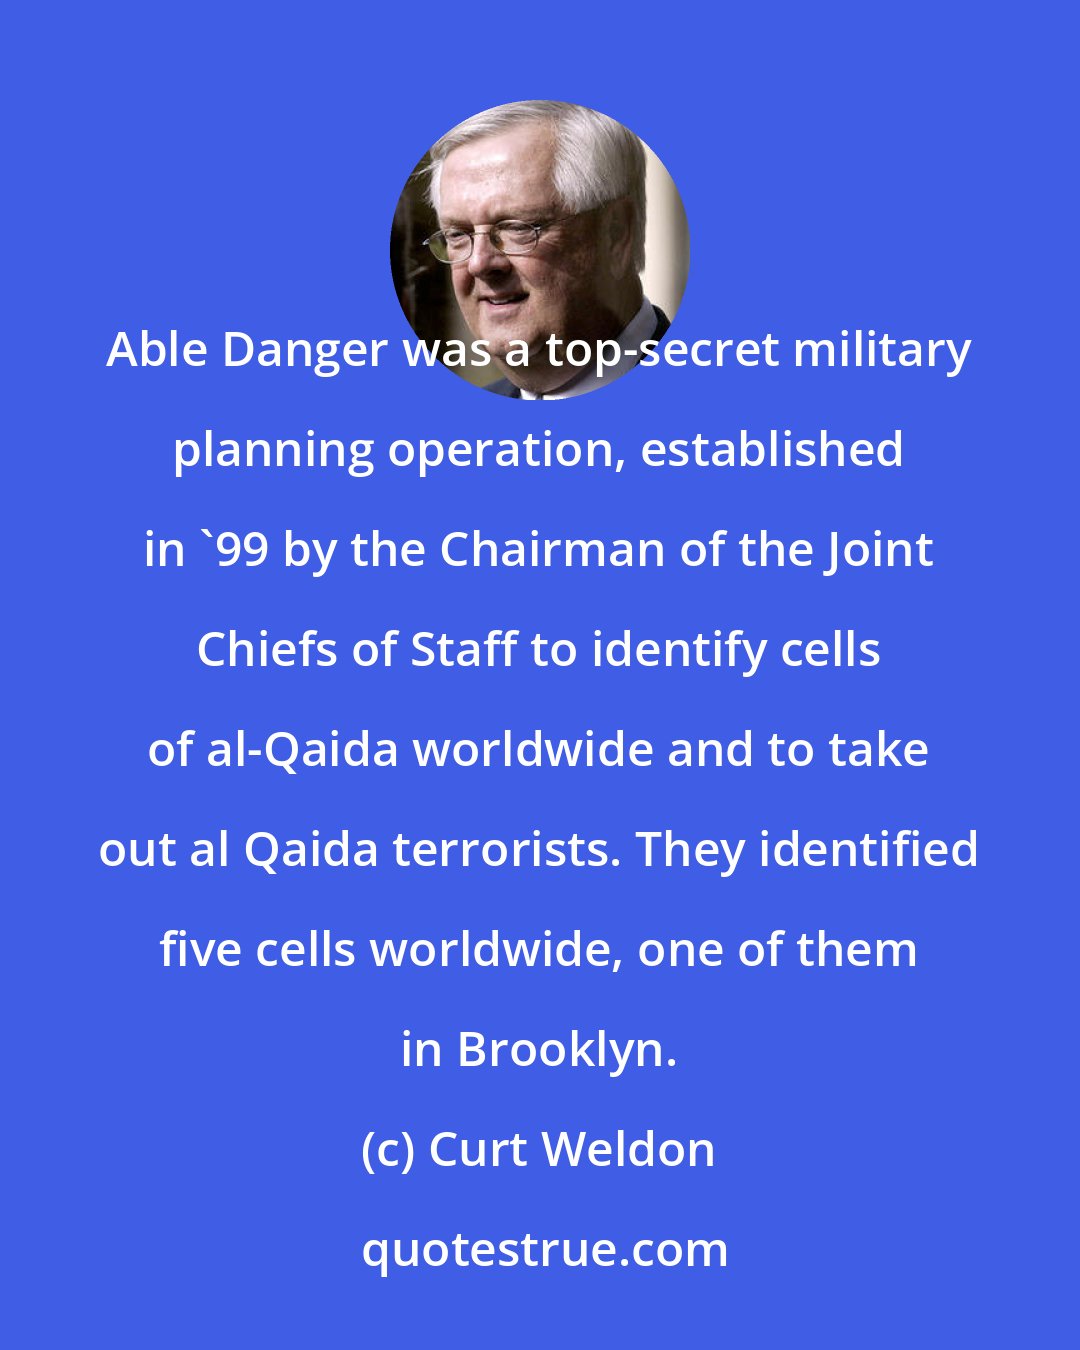 Curt Weldon: Able Danger was a top-secret military planning operation, established in '99 by the Chairman of the Joint Chiefs of Staff to identify cells of al-Qaida worldwide and to take out al Qaida terrorists. They identified five cells worldwide, one of them in Brooklyn.